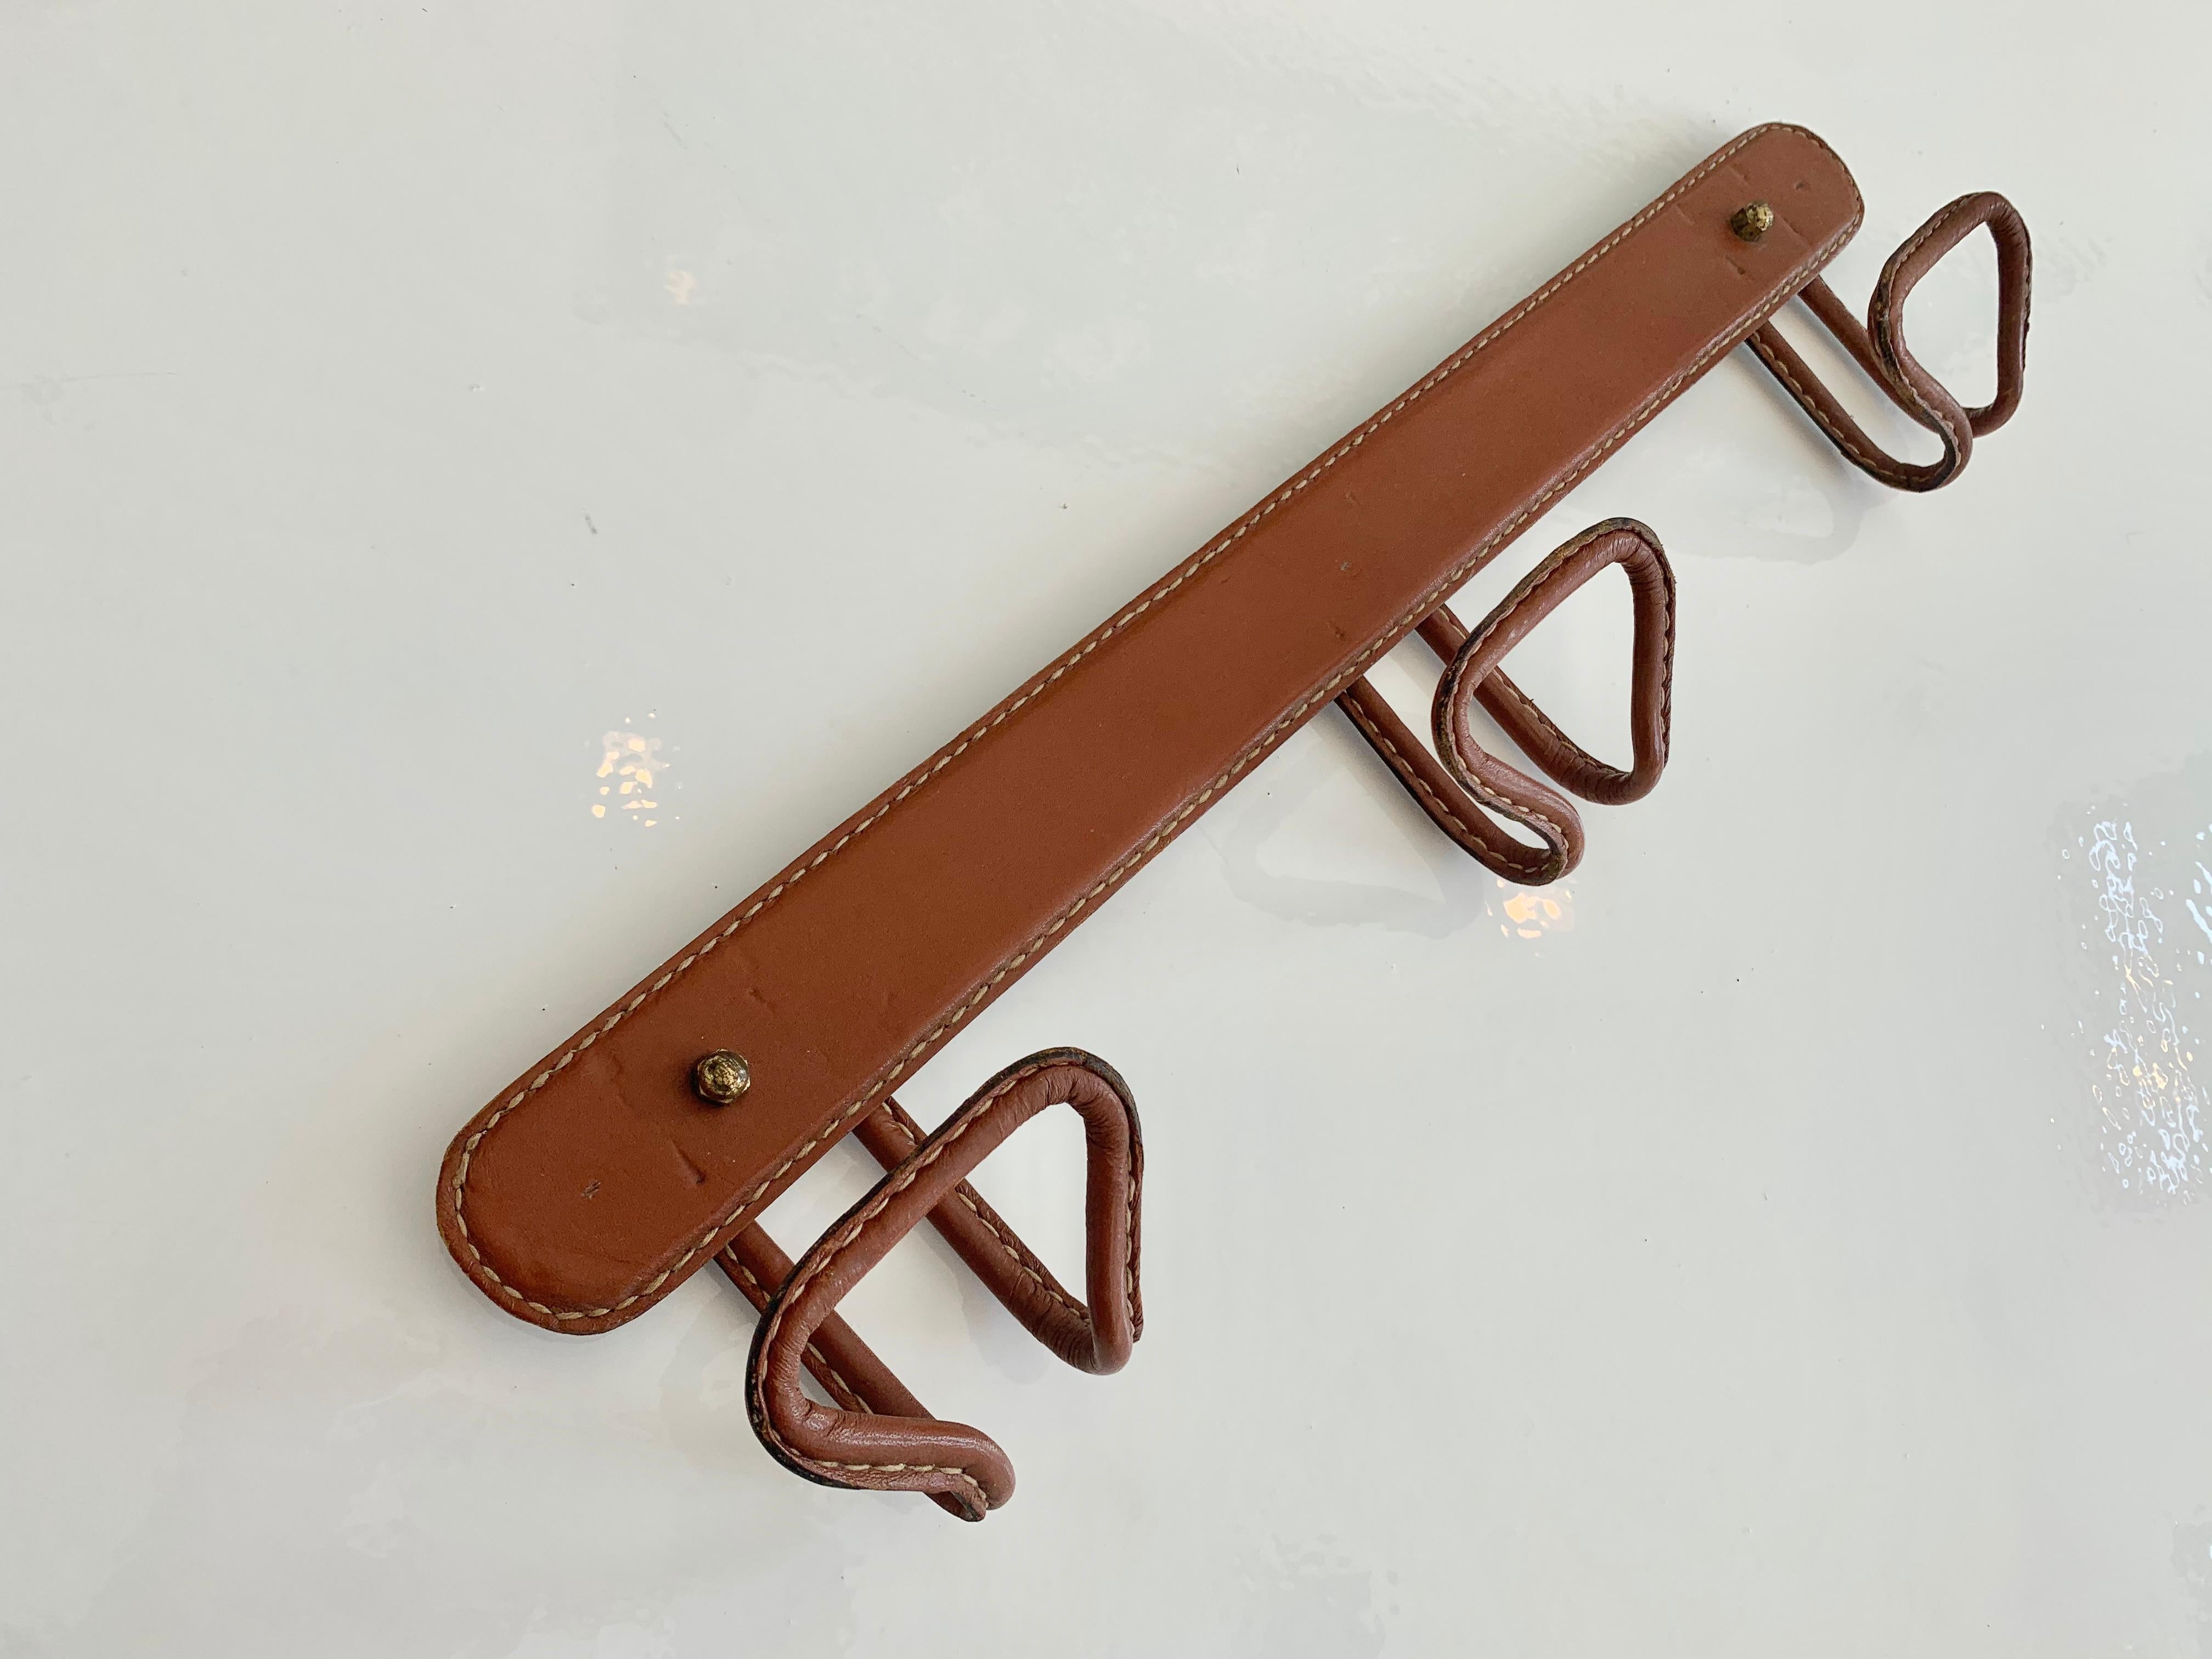 Elegant saddle leather coat rack by French designer Jacques Adnet. Iron frame with saddle leather tongue hooks. Entire piece is covered in leather. Two brass nuts enable you to hide the screws in the wall. Signature Adnet contrast stitching. Great